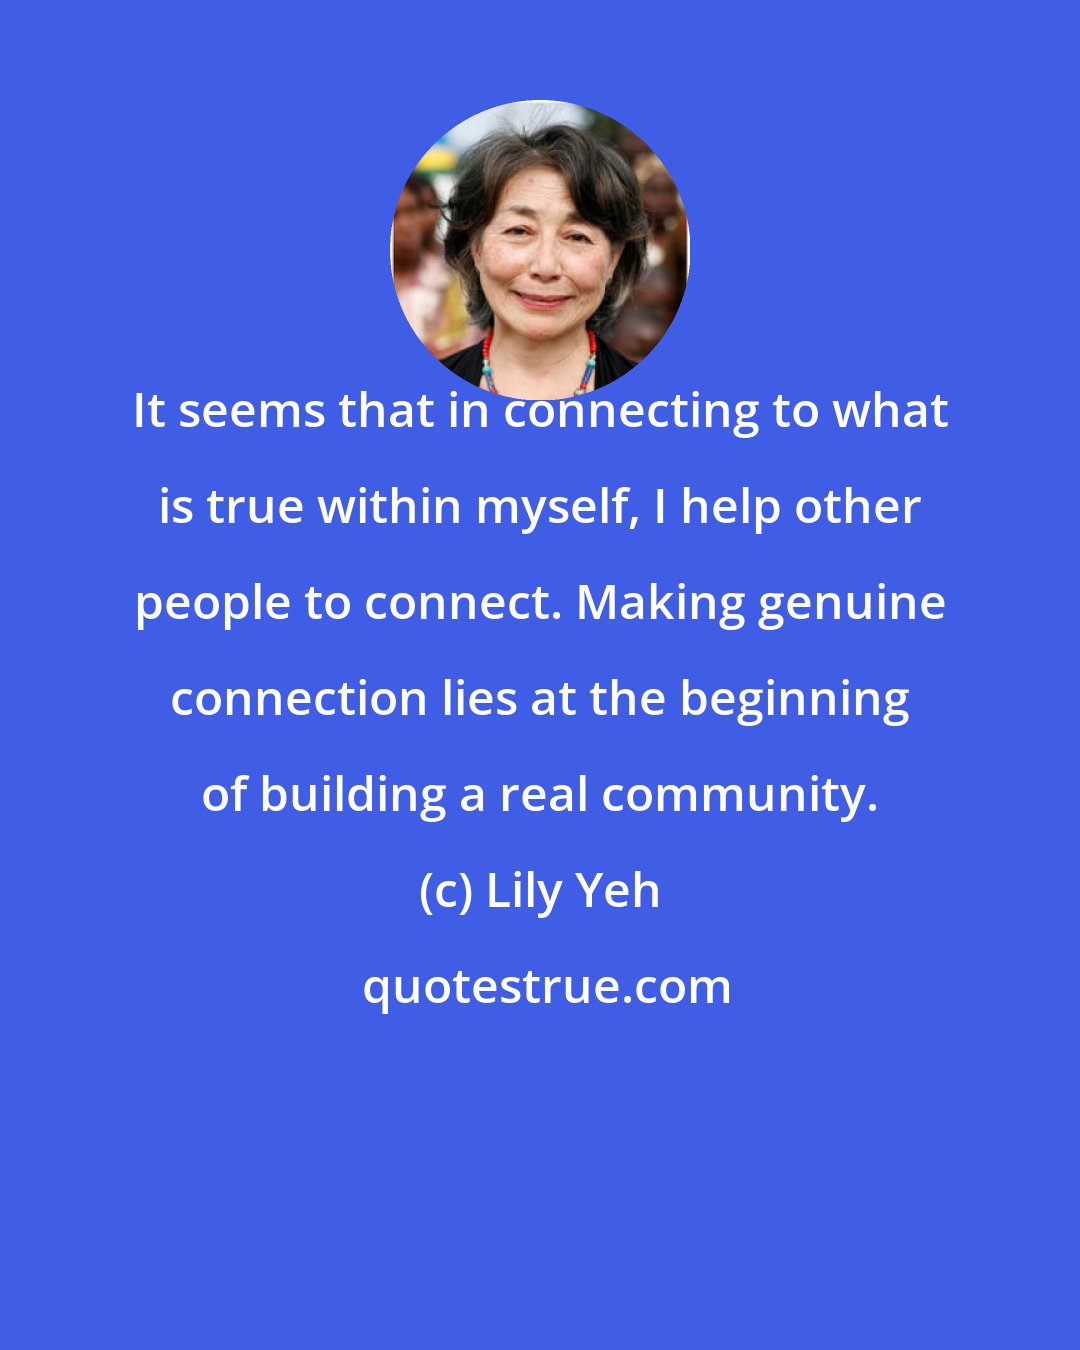 Lily Yeh: It seems that in connecting to what is true within myself, I help other people to connect. Making genuine connection lies at the beginning of building a real community.